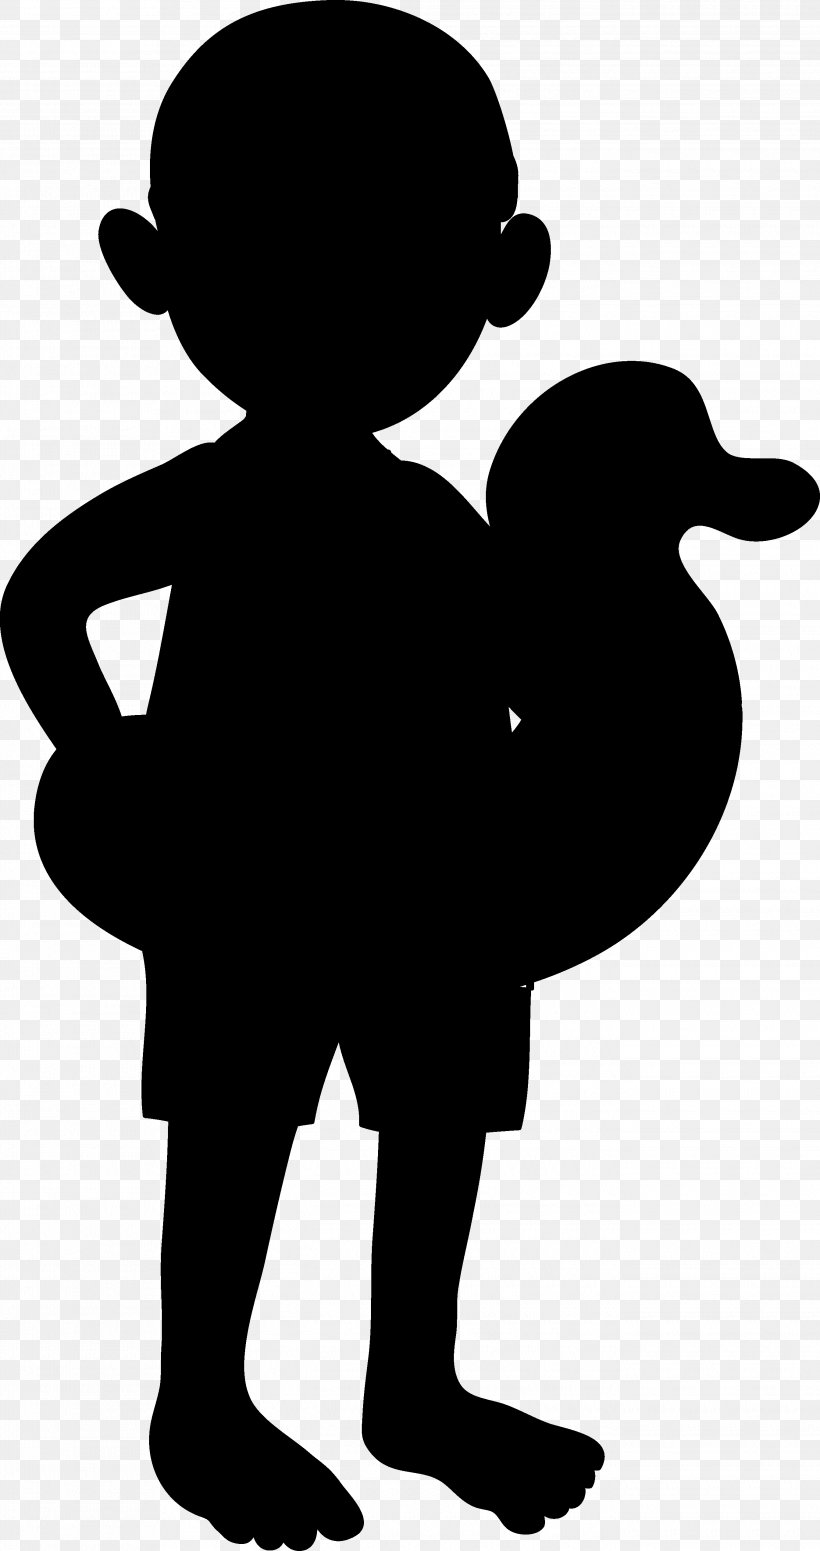 Silhouette Duck Image Photograph Clip Art, PNG, 2690x5089px, Silhouette, Black, Blackandwhite, Character, Duck Download Free